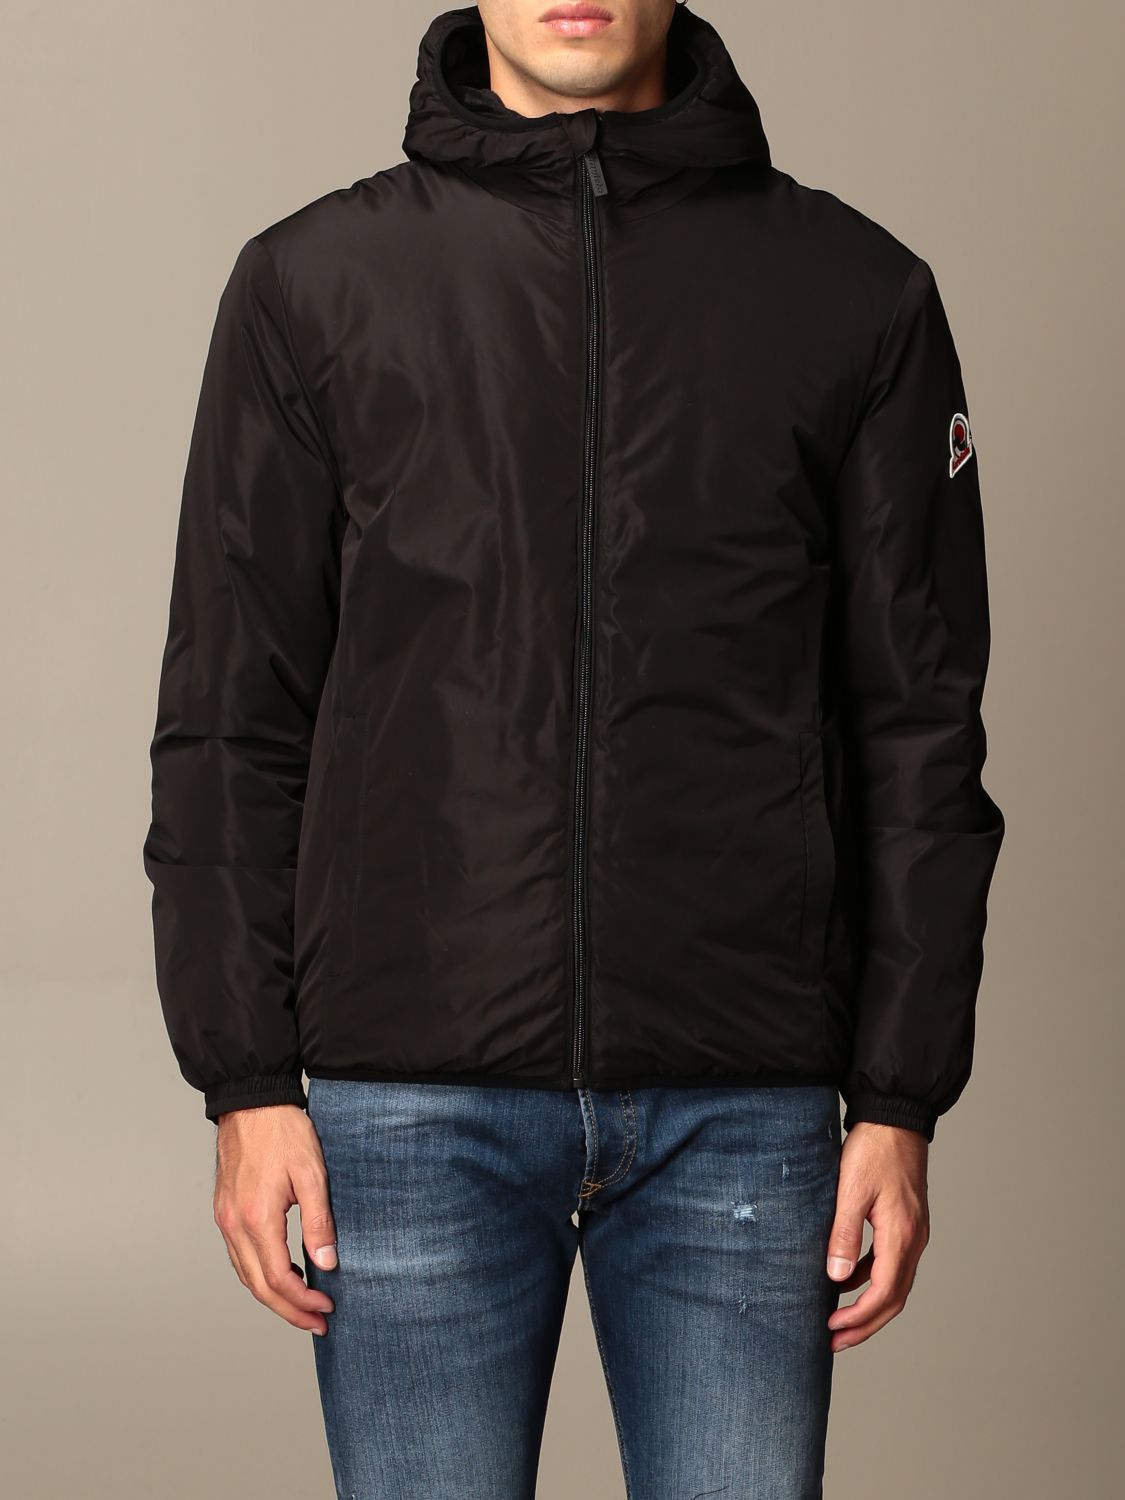 Invicta Outlet: jacket with hood and zip - Black | Invicta jacket ...